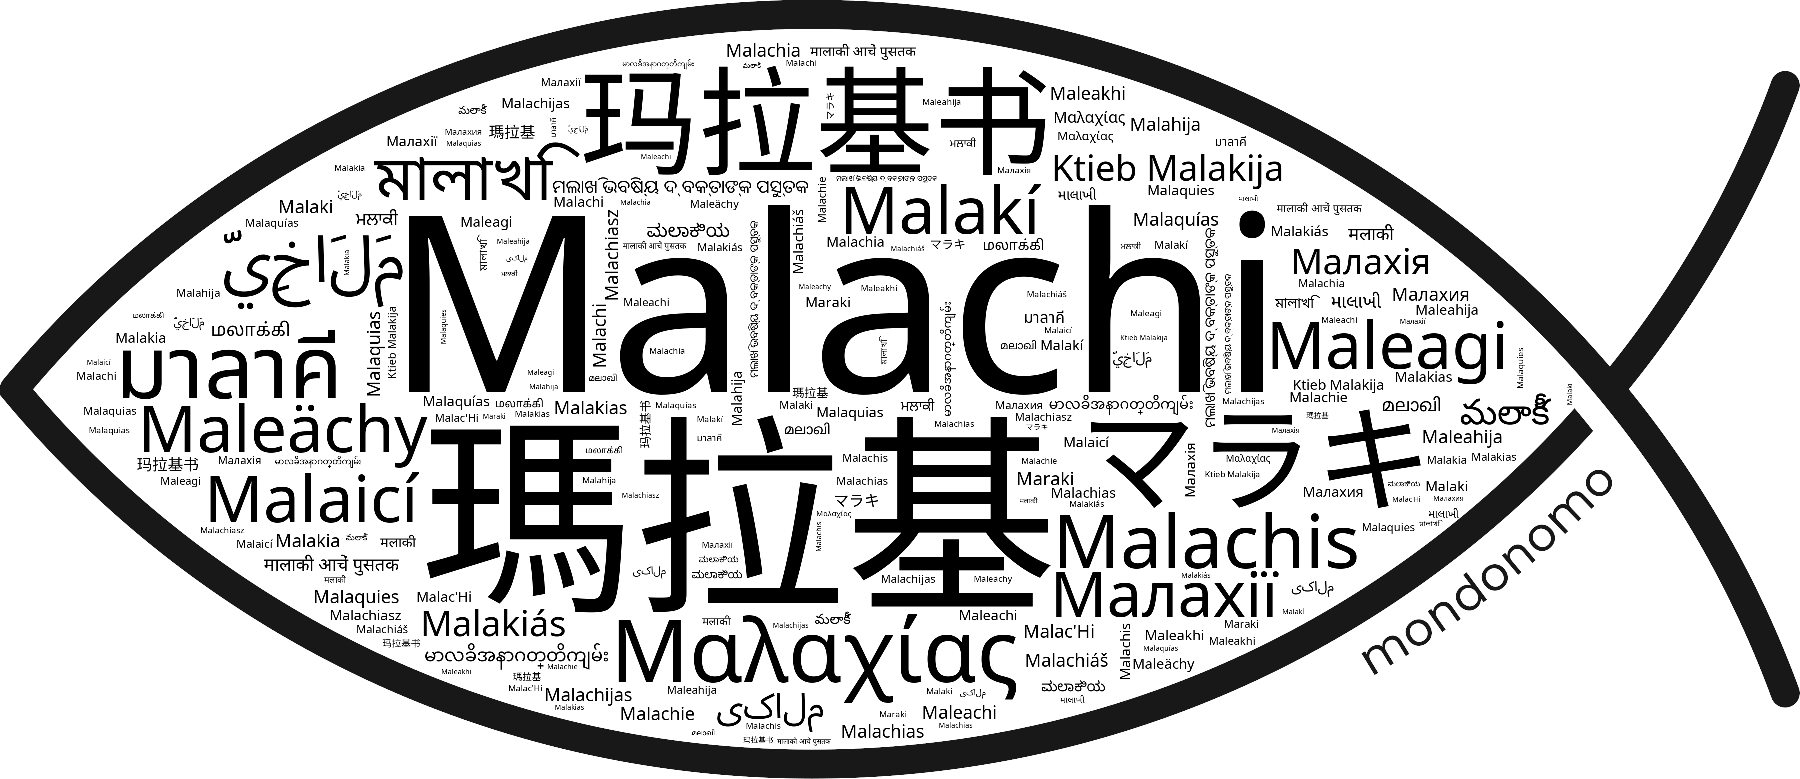 Name Malachi in the world's Bibles